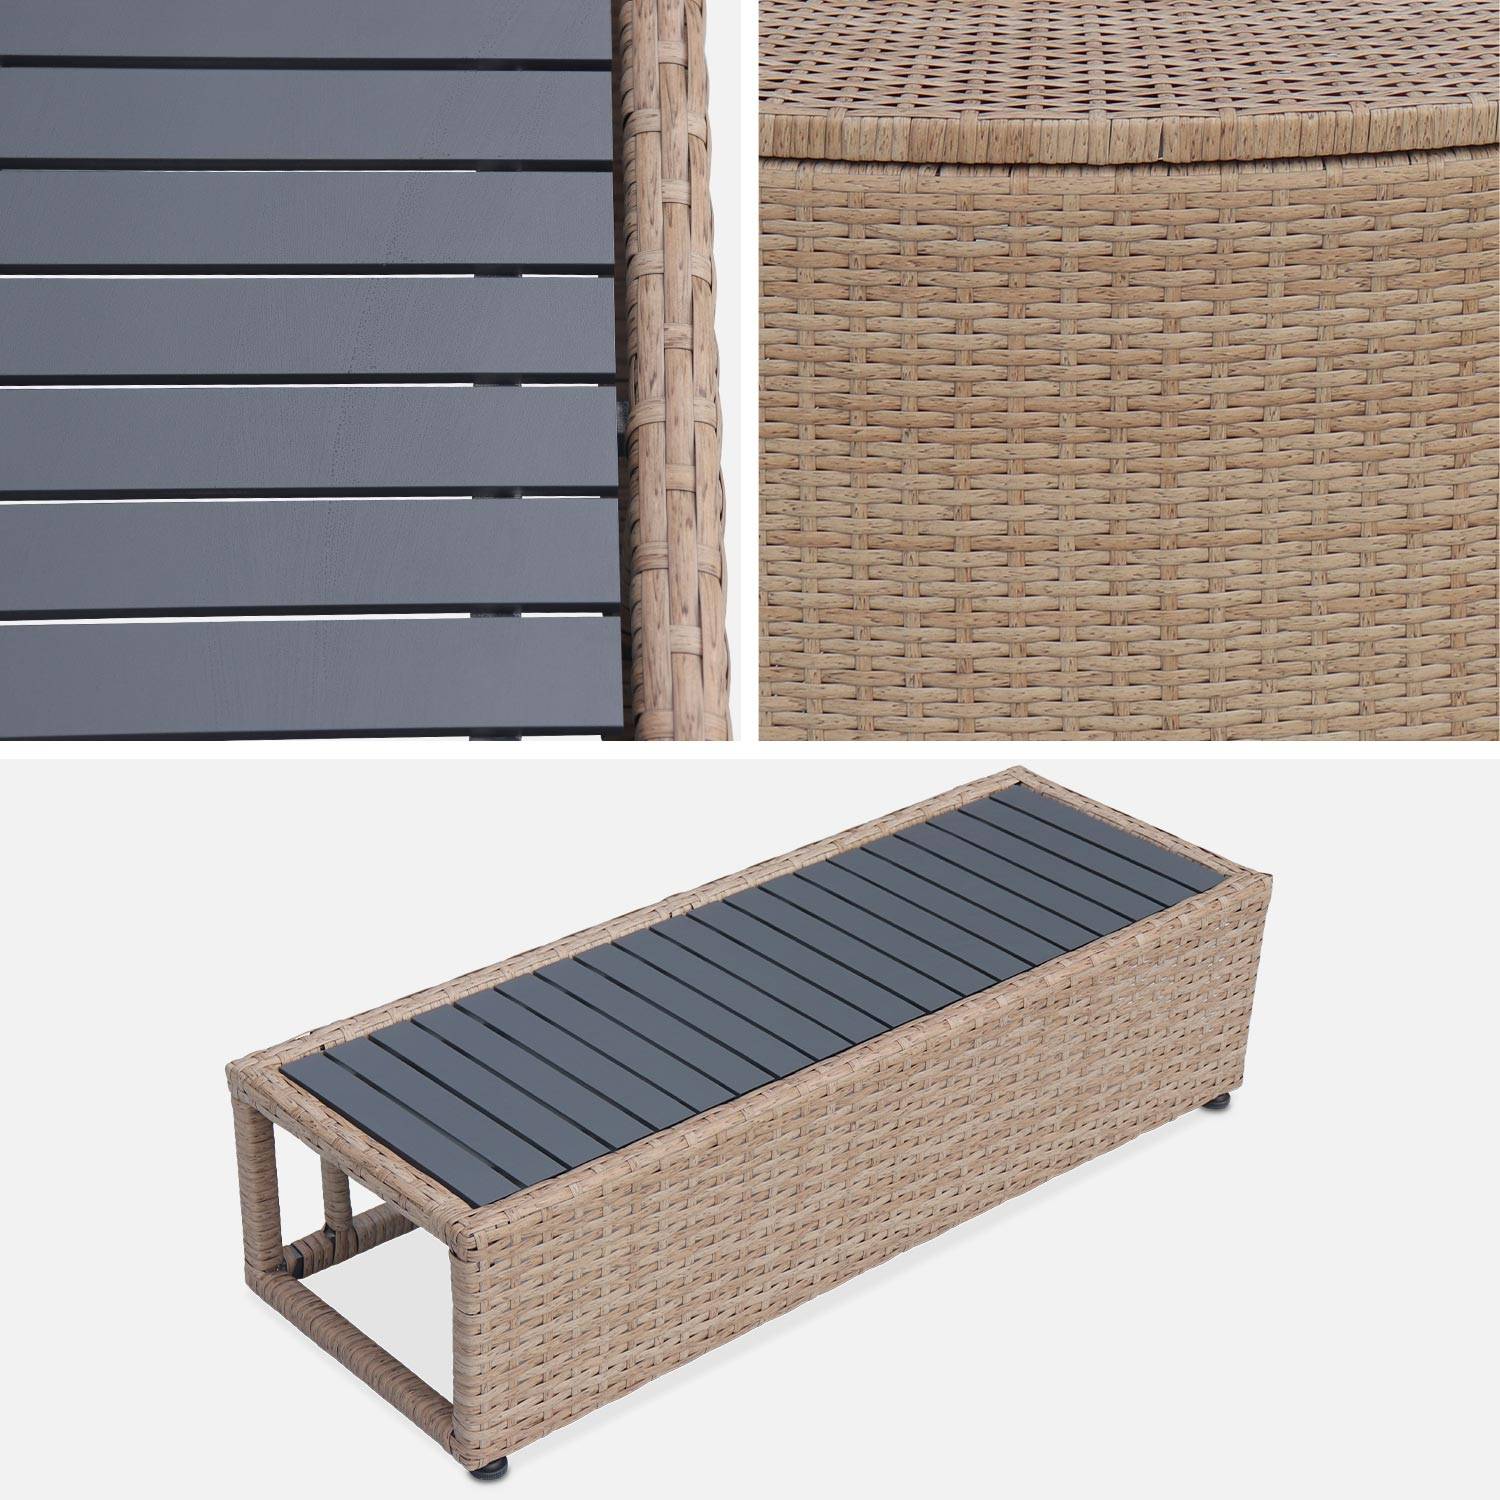 Natural polyrattan surround for square hot tub with cabinet, shelf and footstep,sweeek,Photo6